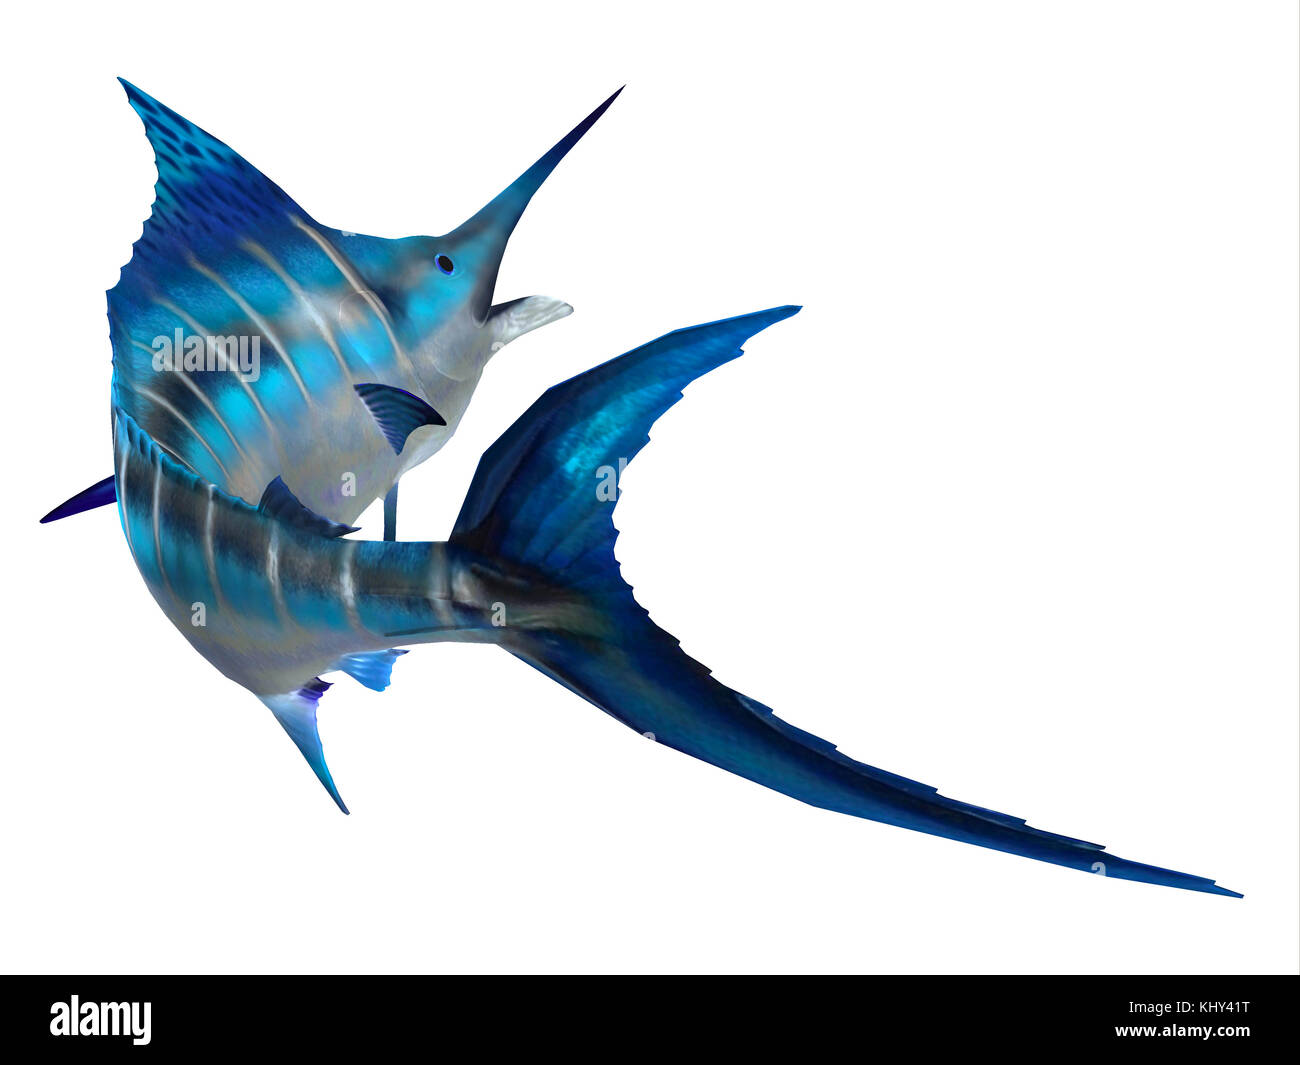 Marlin Fish Tail - The Atlantic Blue Marlin fish is the largest bony fish and is a popular game fish in the Atlantic ocean. Stock Photo